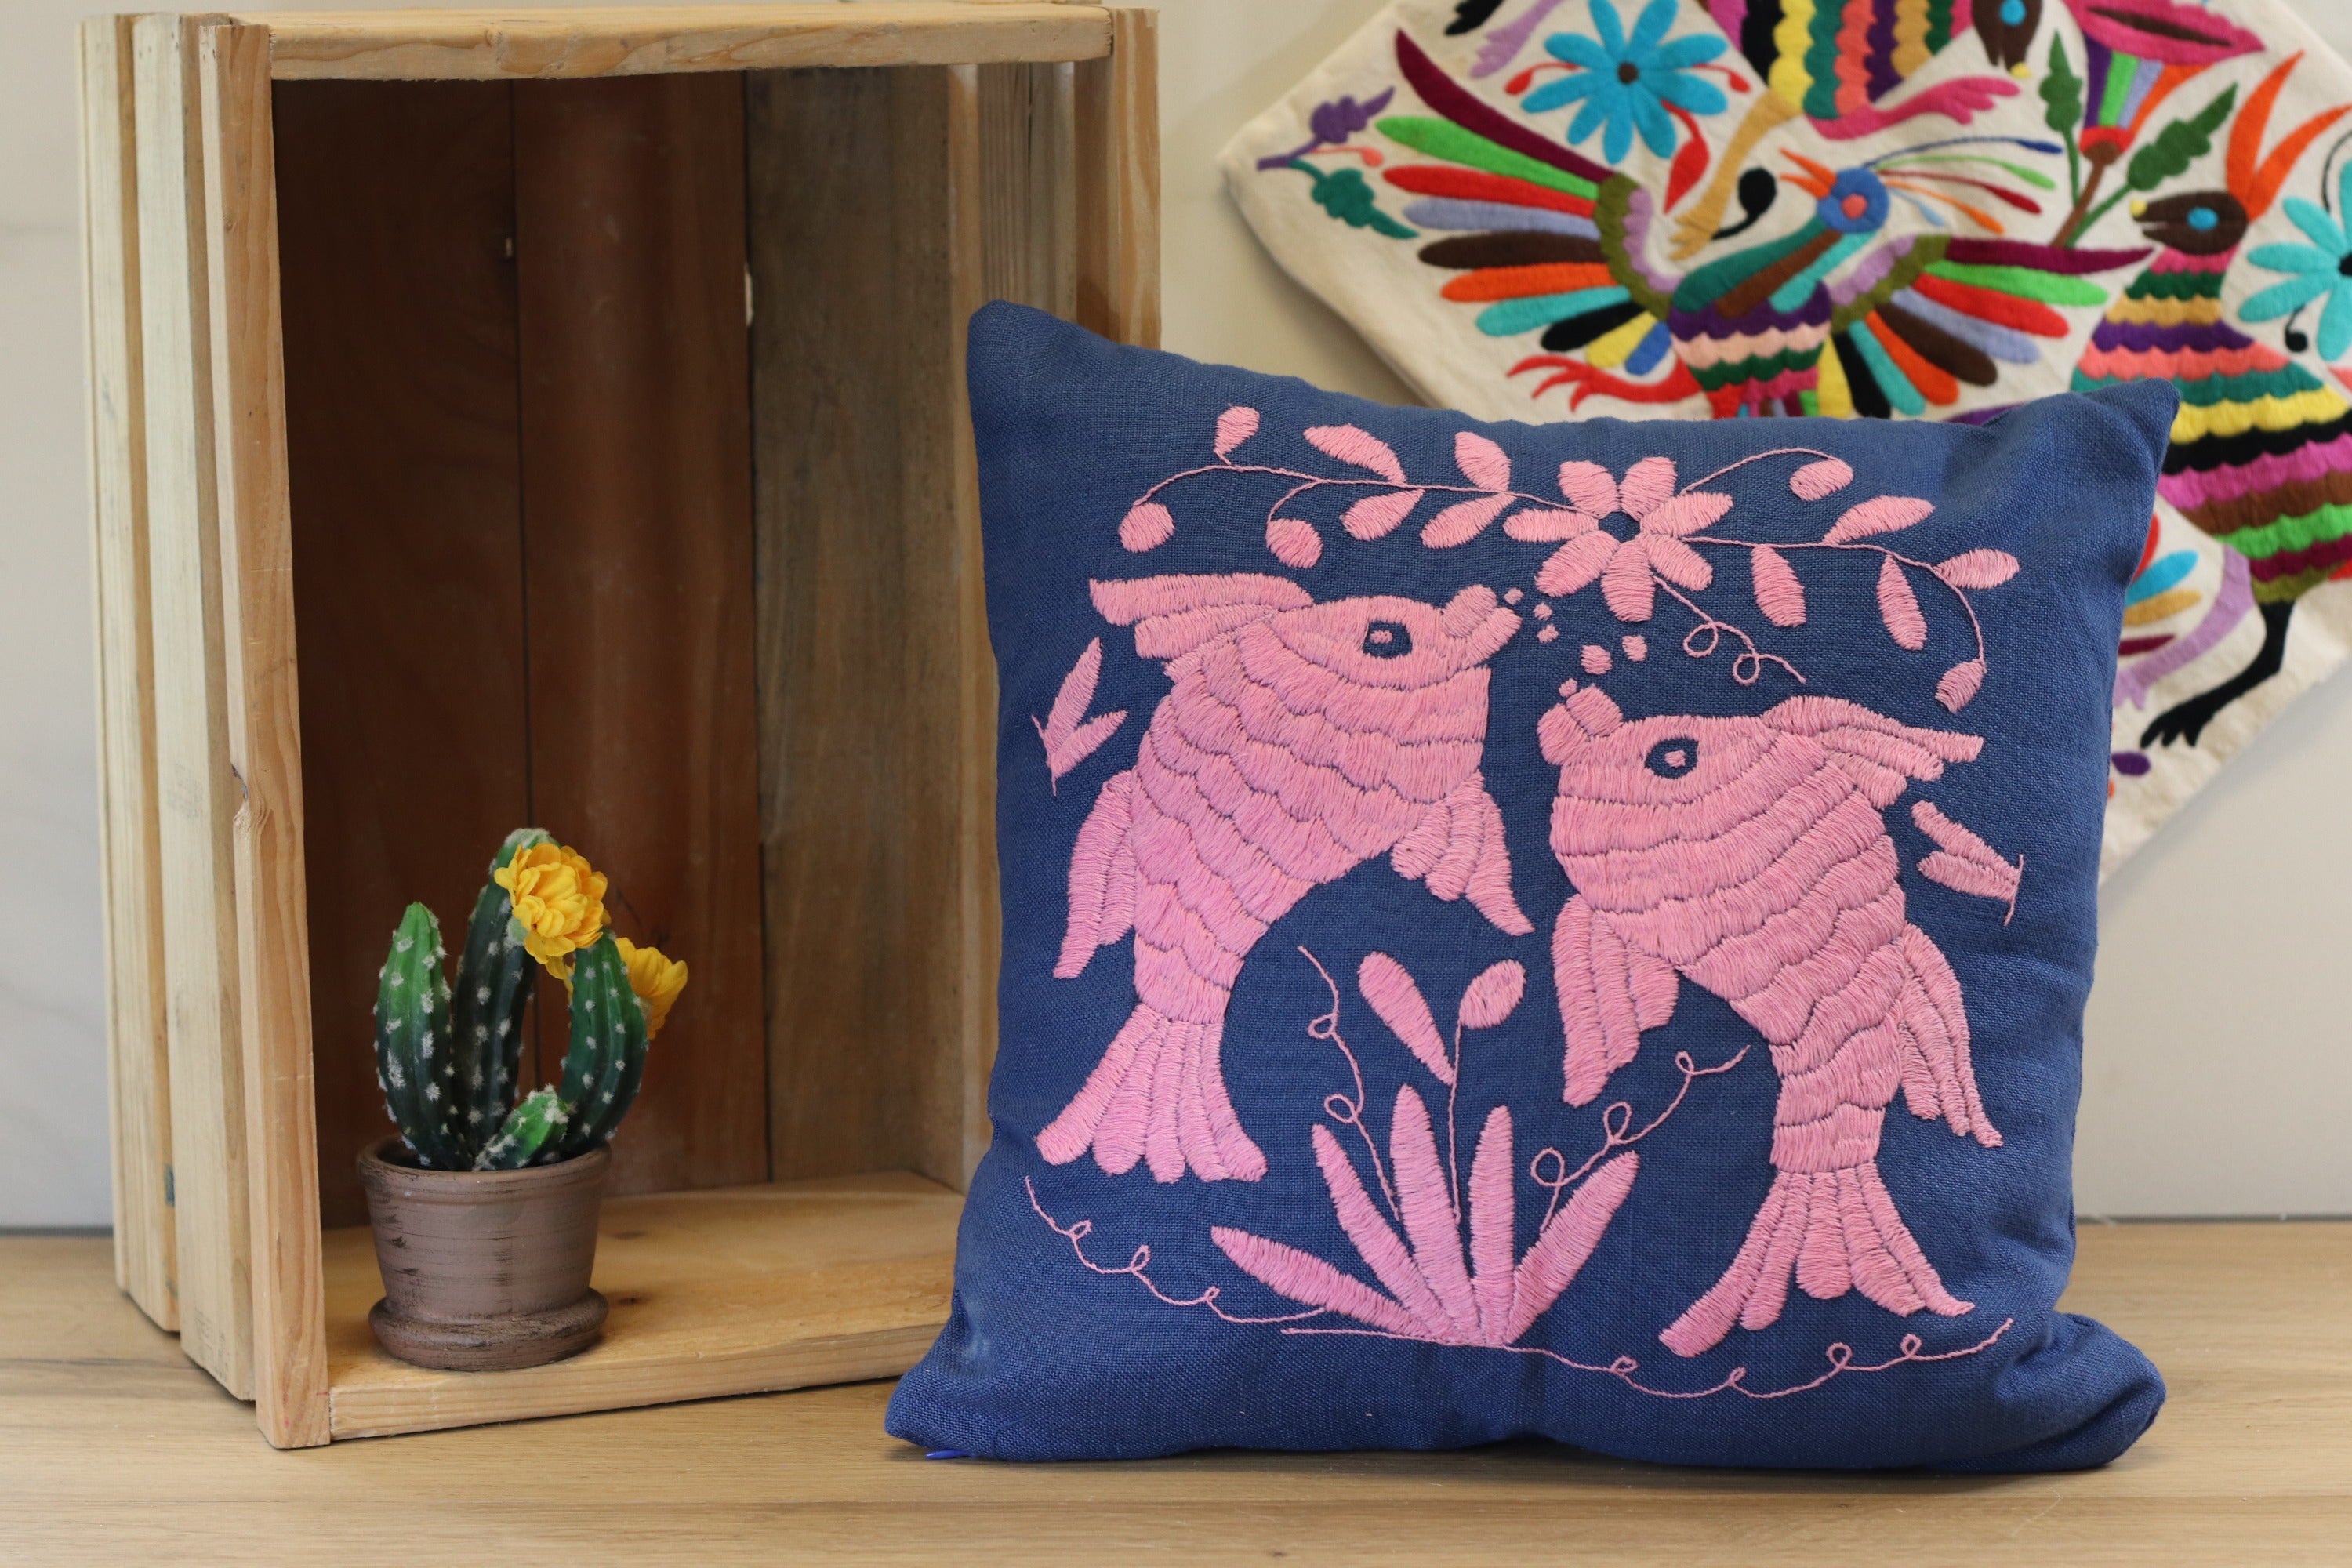 Pink and Navy Tenango Pillow Cover, Hand Embroidered, Otomi Art